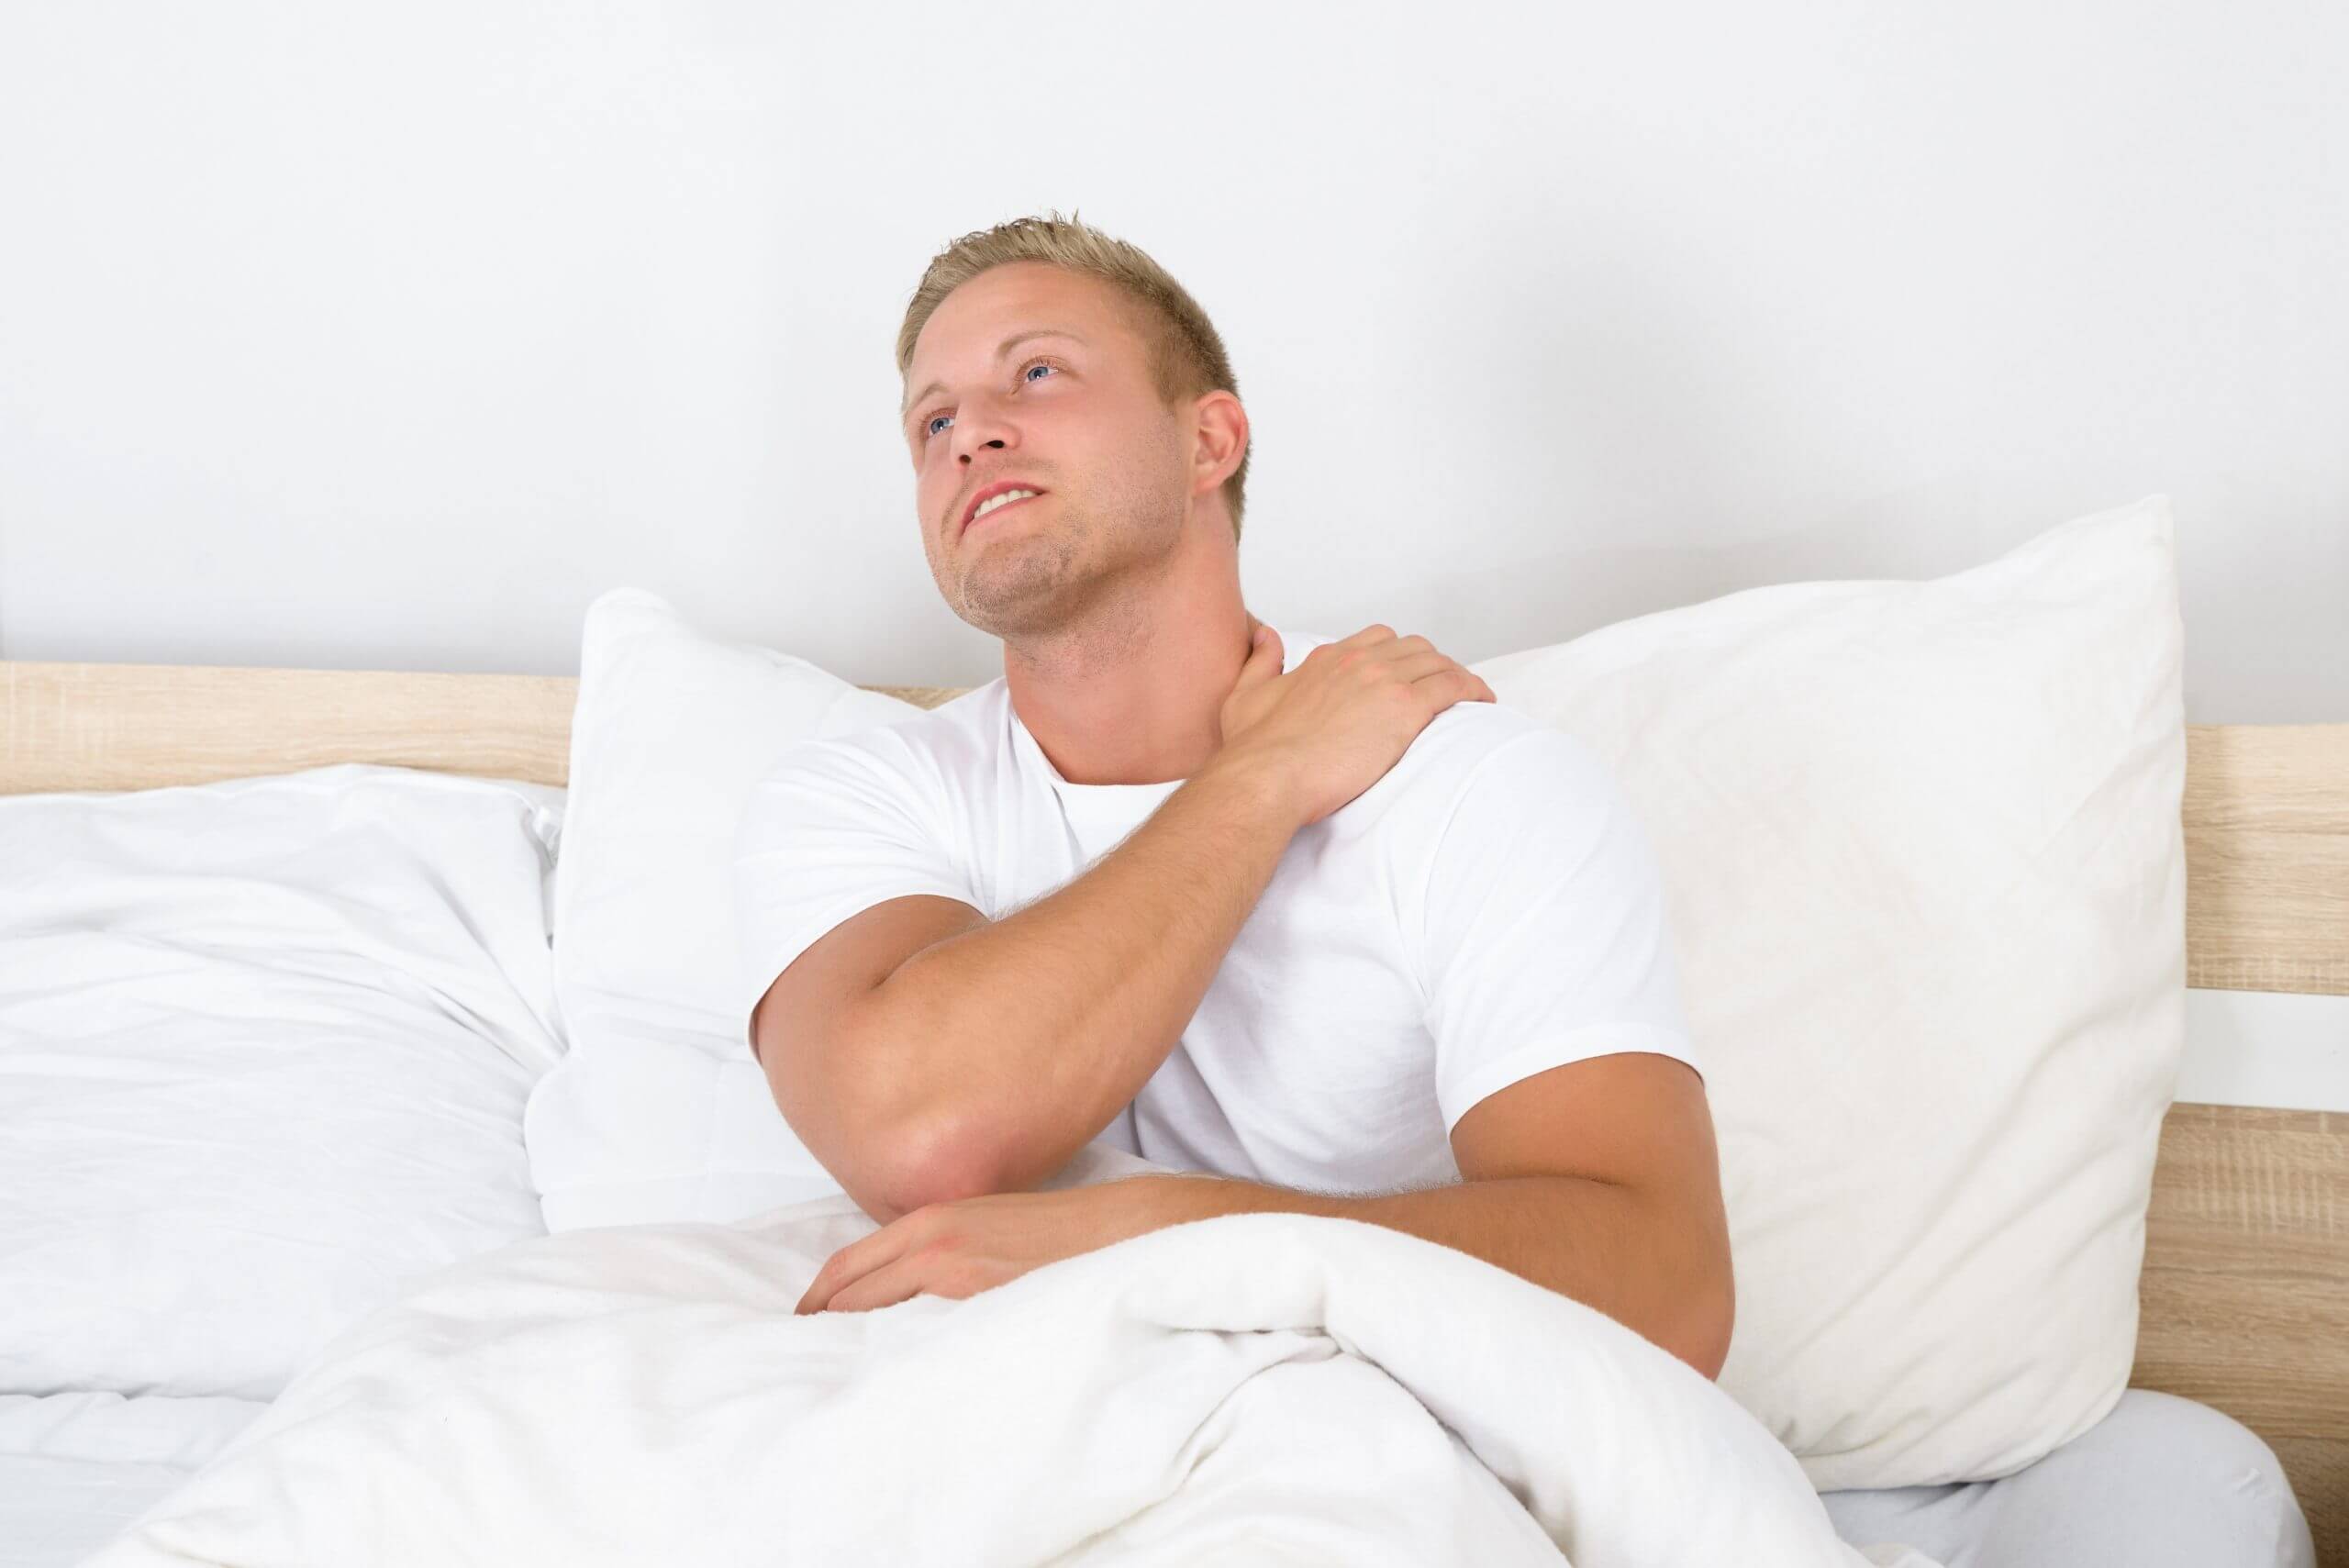 Shoulder Pain from Sleeping? Here Are Possible Reasons Why and